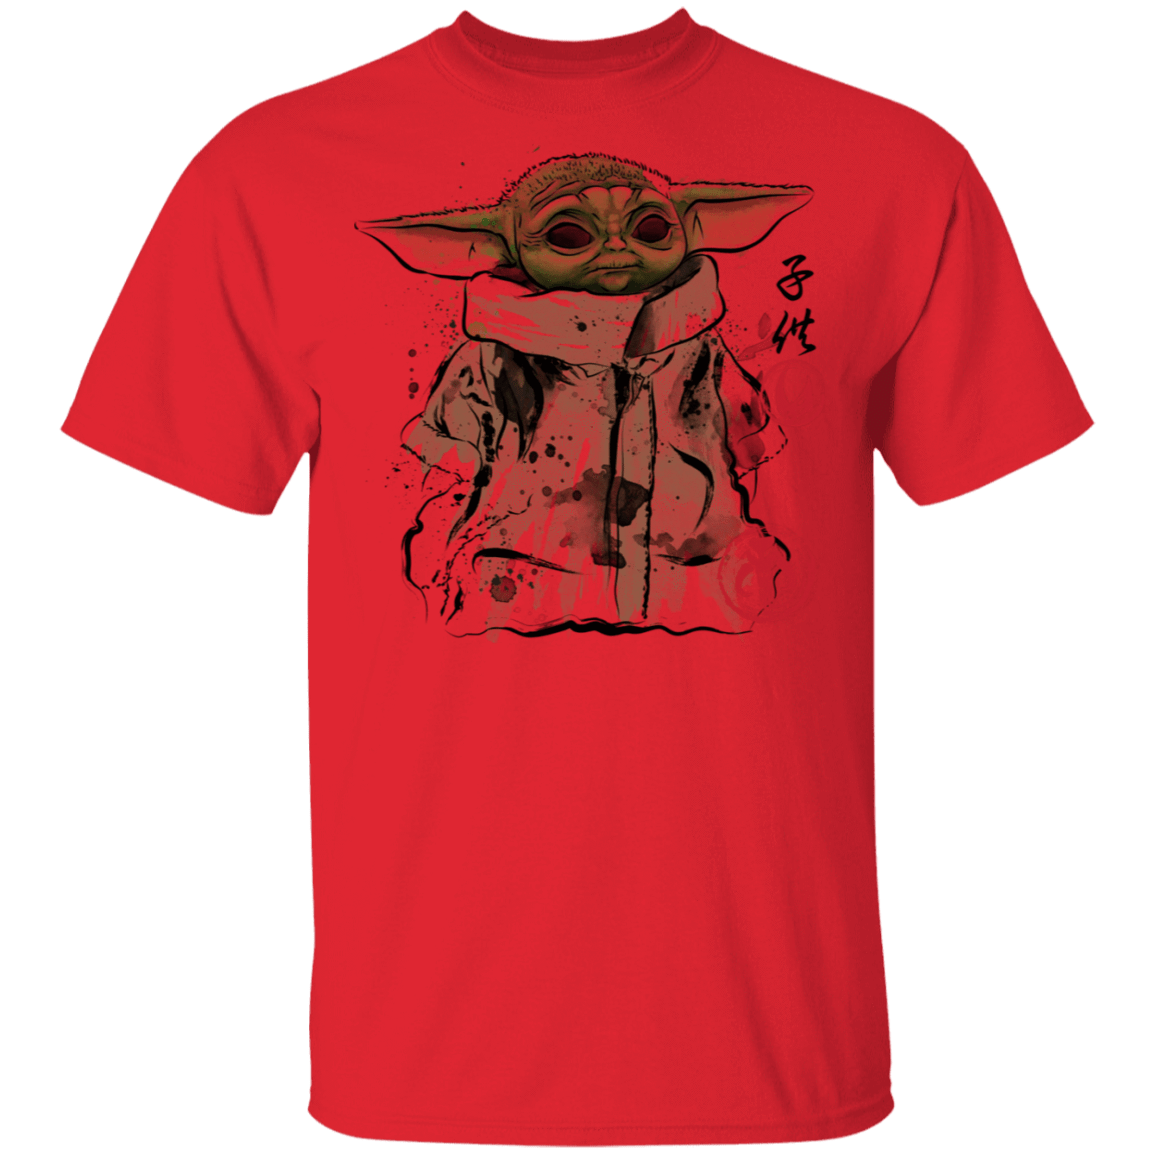 T-Shirts Red / S Clan of Two The Child T-Shirt